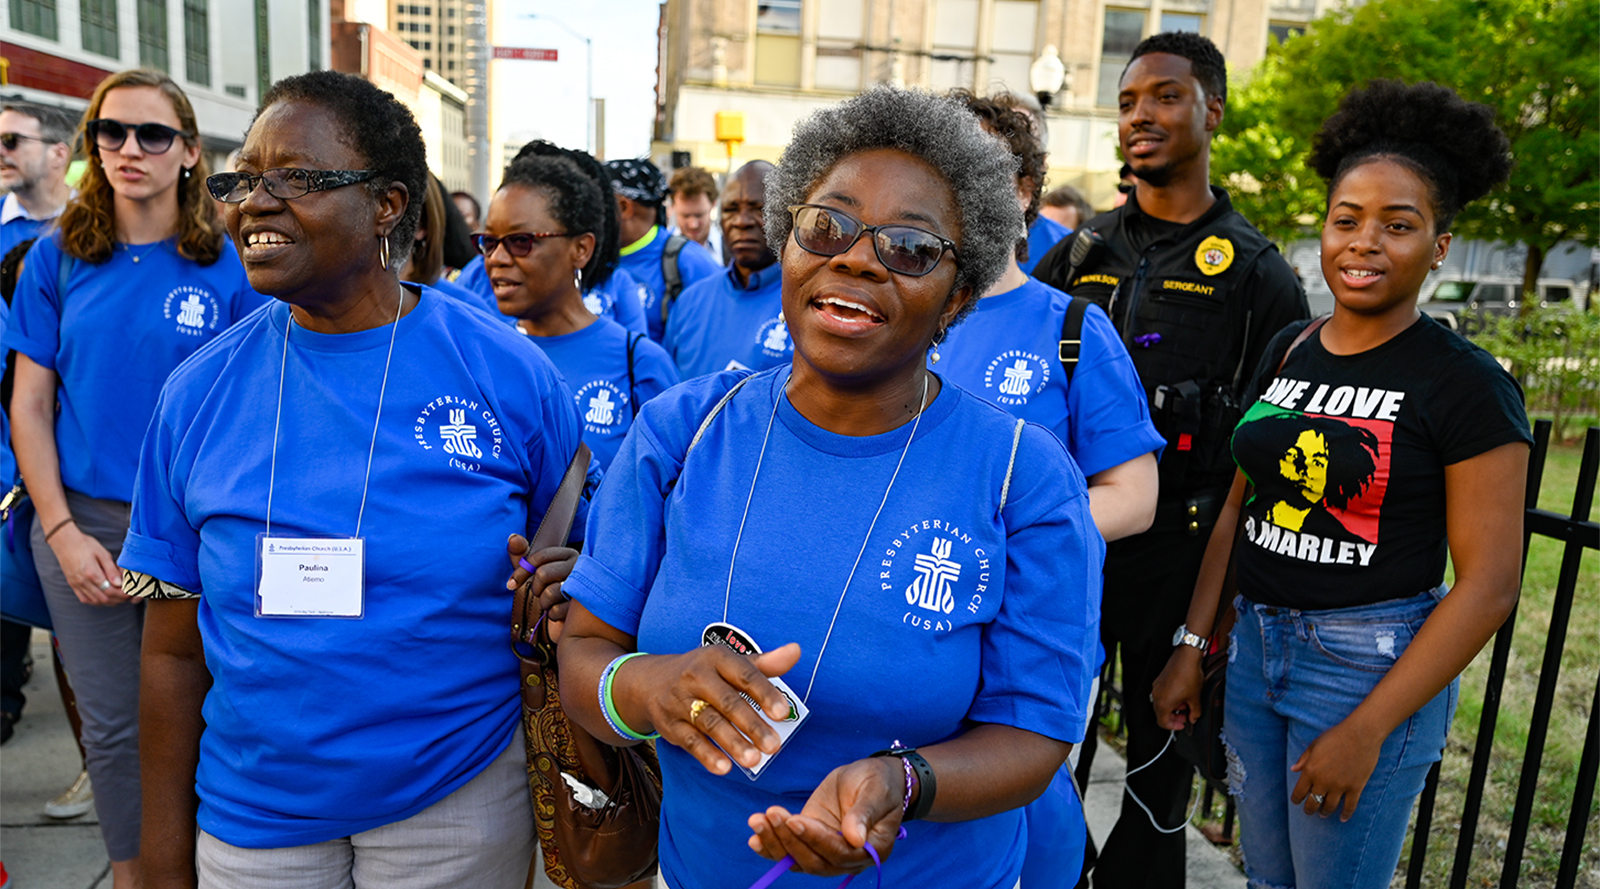 Nearly 200 walk in downtown Baltimore as part of the Baltimore Ceasefire Weekend to draw attention to gun violence. Photo by Rich Copley.